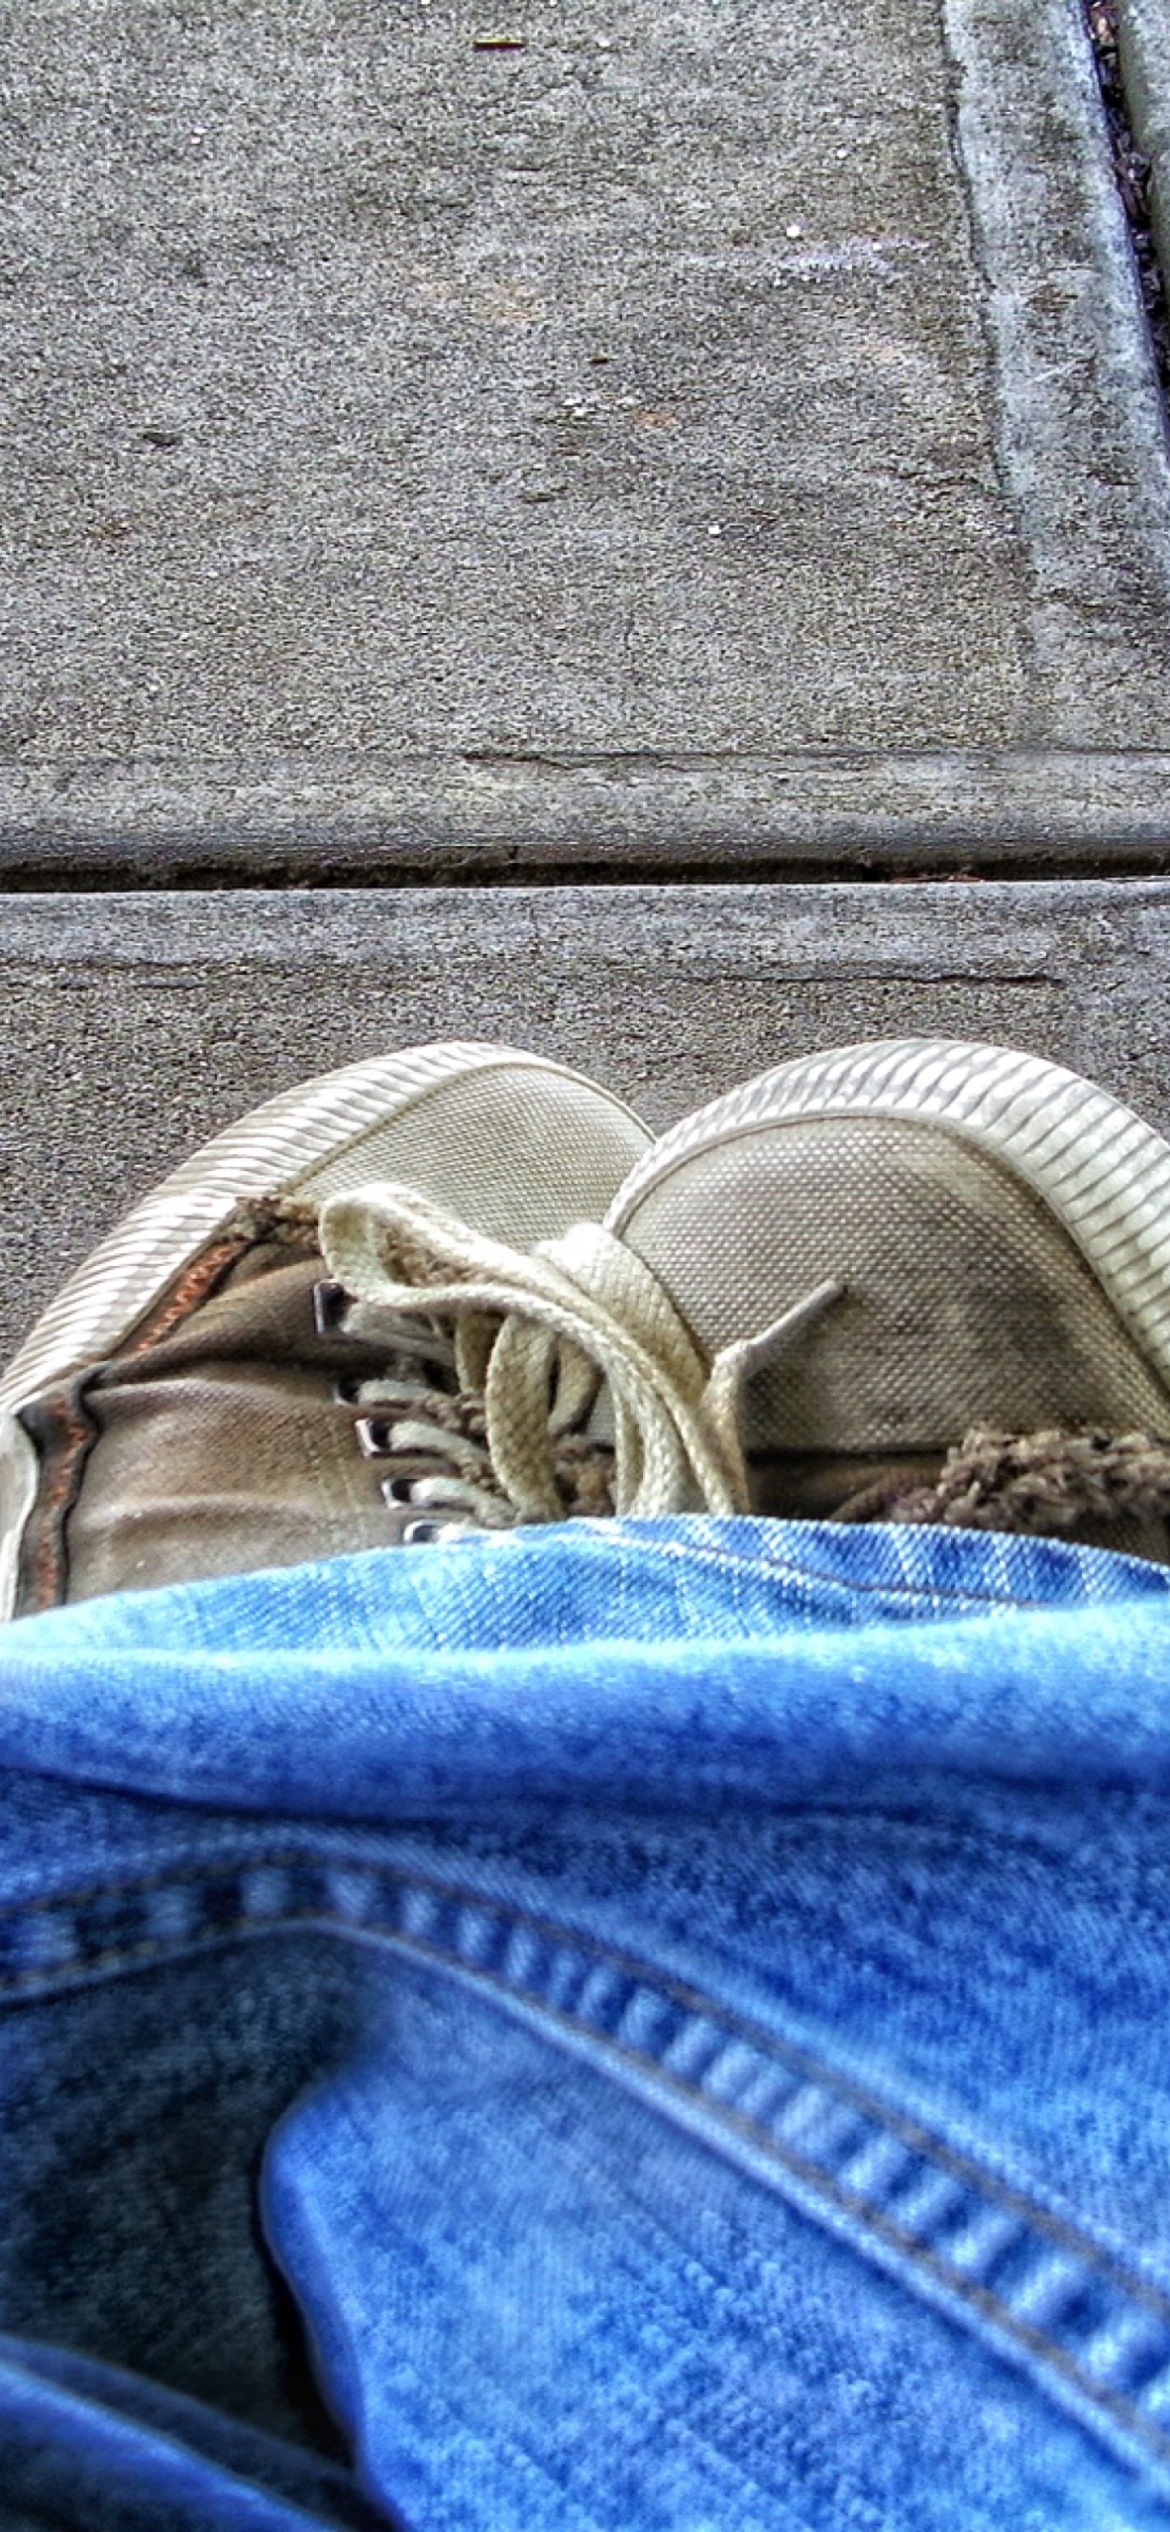 Old Shoes wallpaper 1170x2532